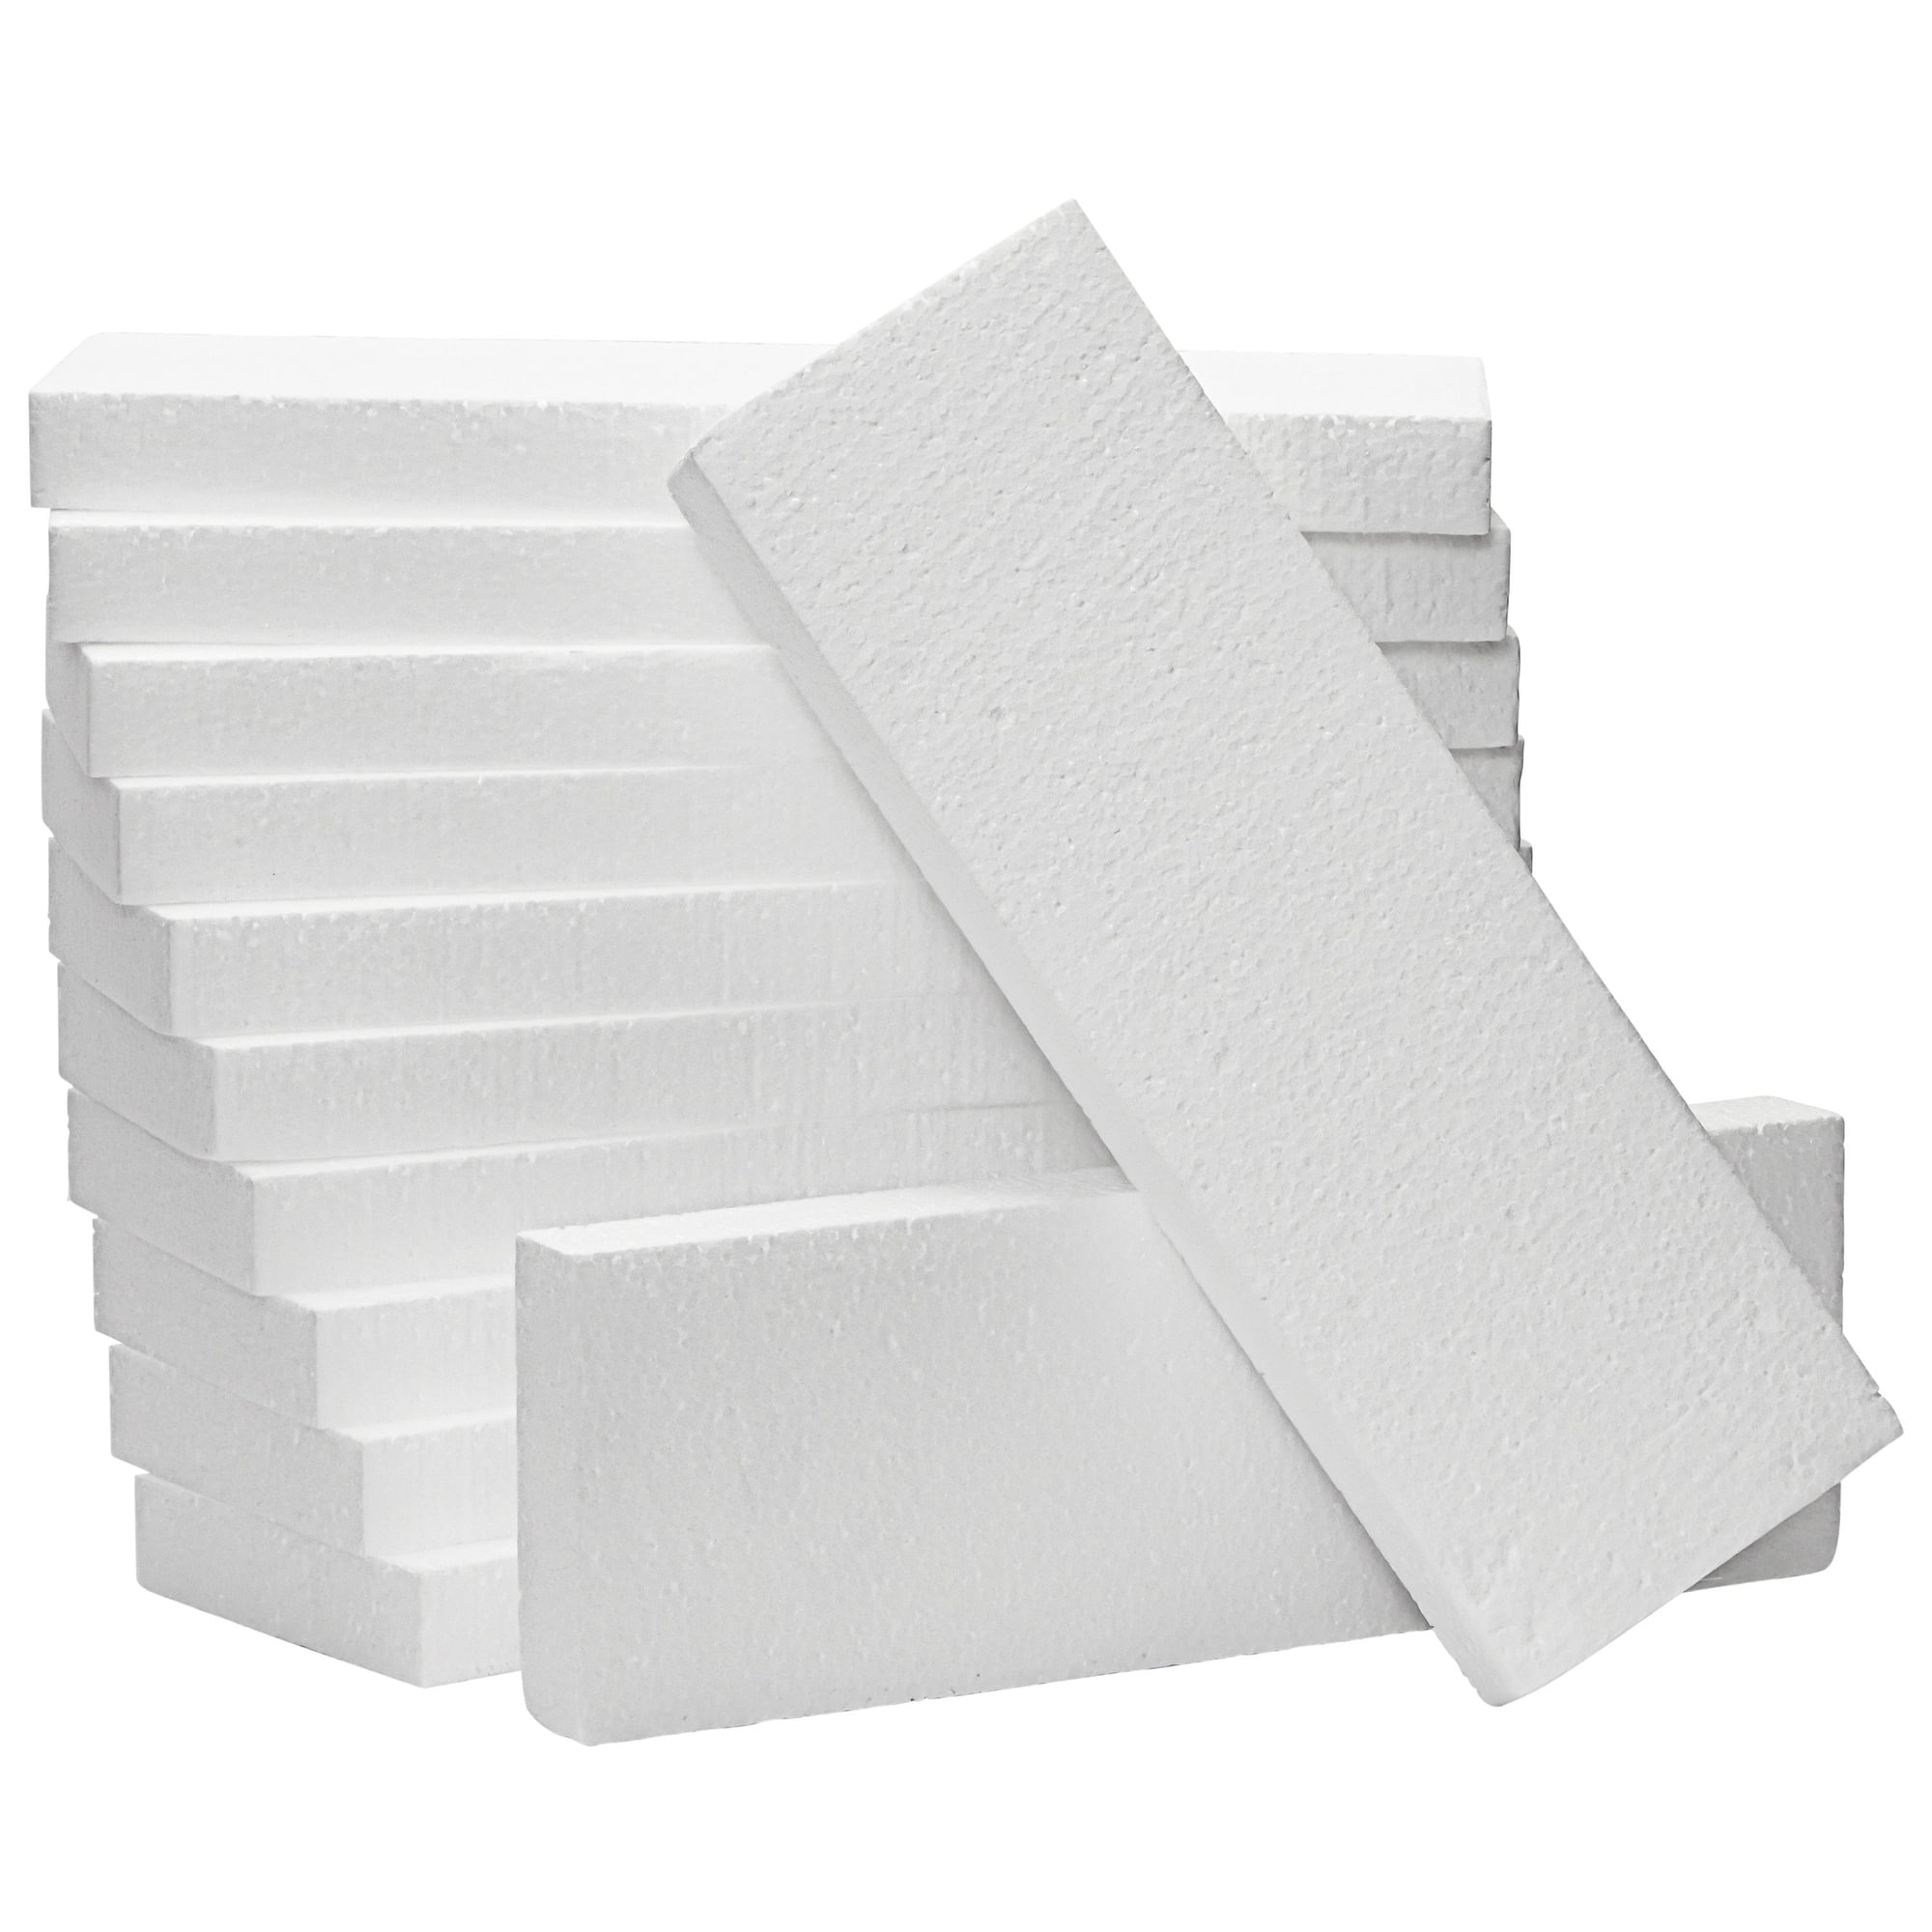 6 Pack (1 of Each) Foam Geometric Shapes Styrofoam for DIY Crafts Art Modeling, White, 2.5 to 5.9 Inches